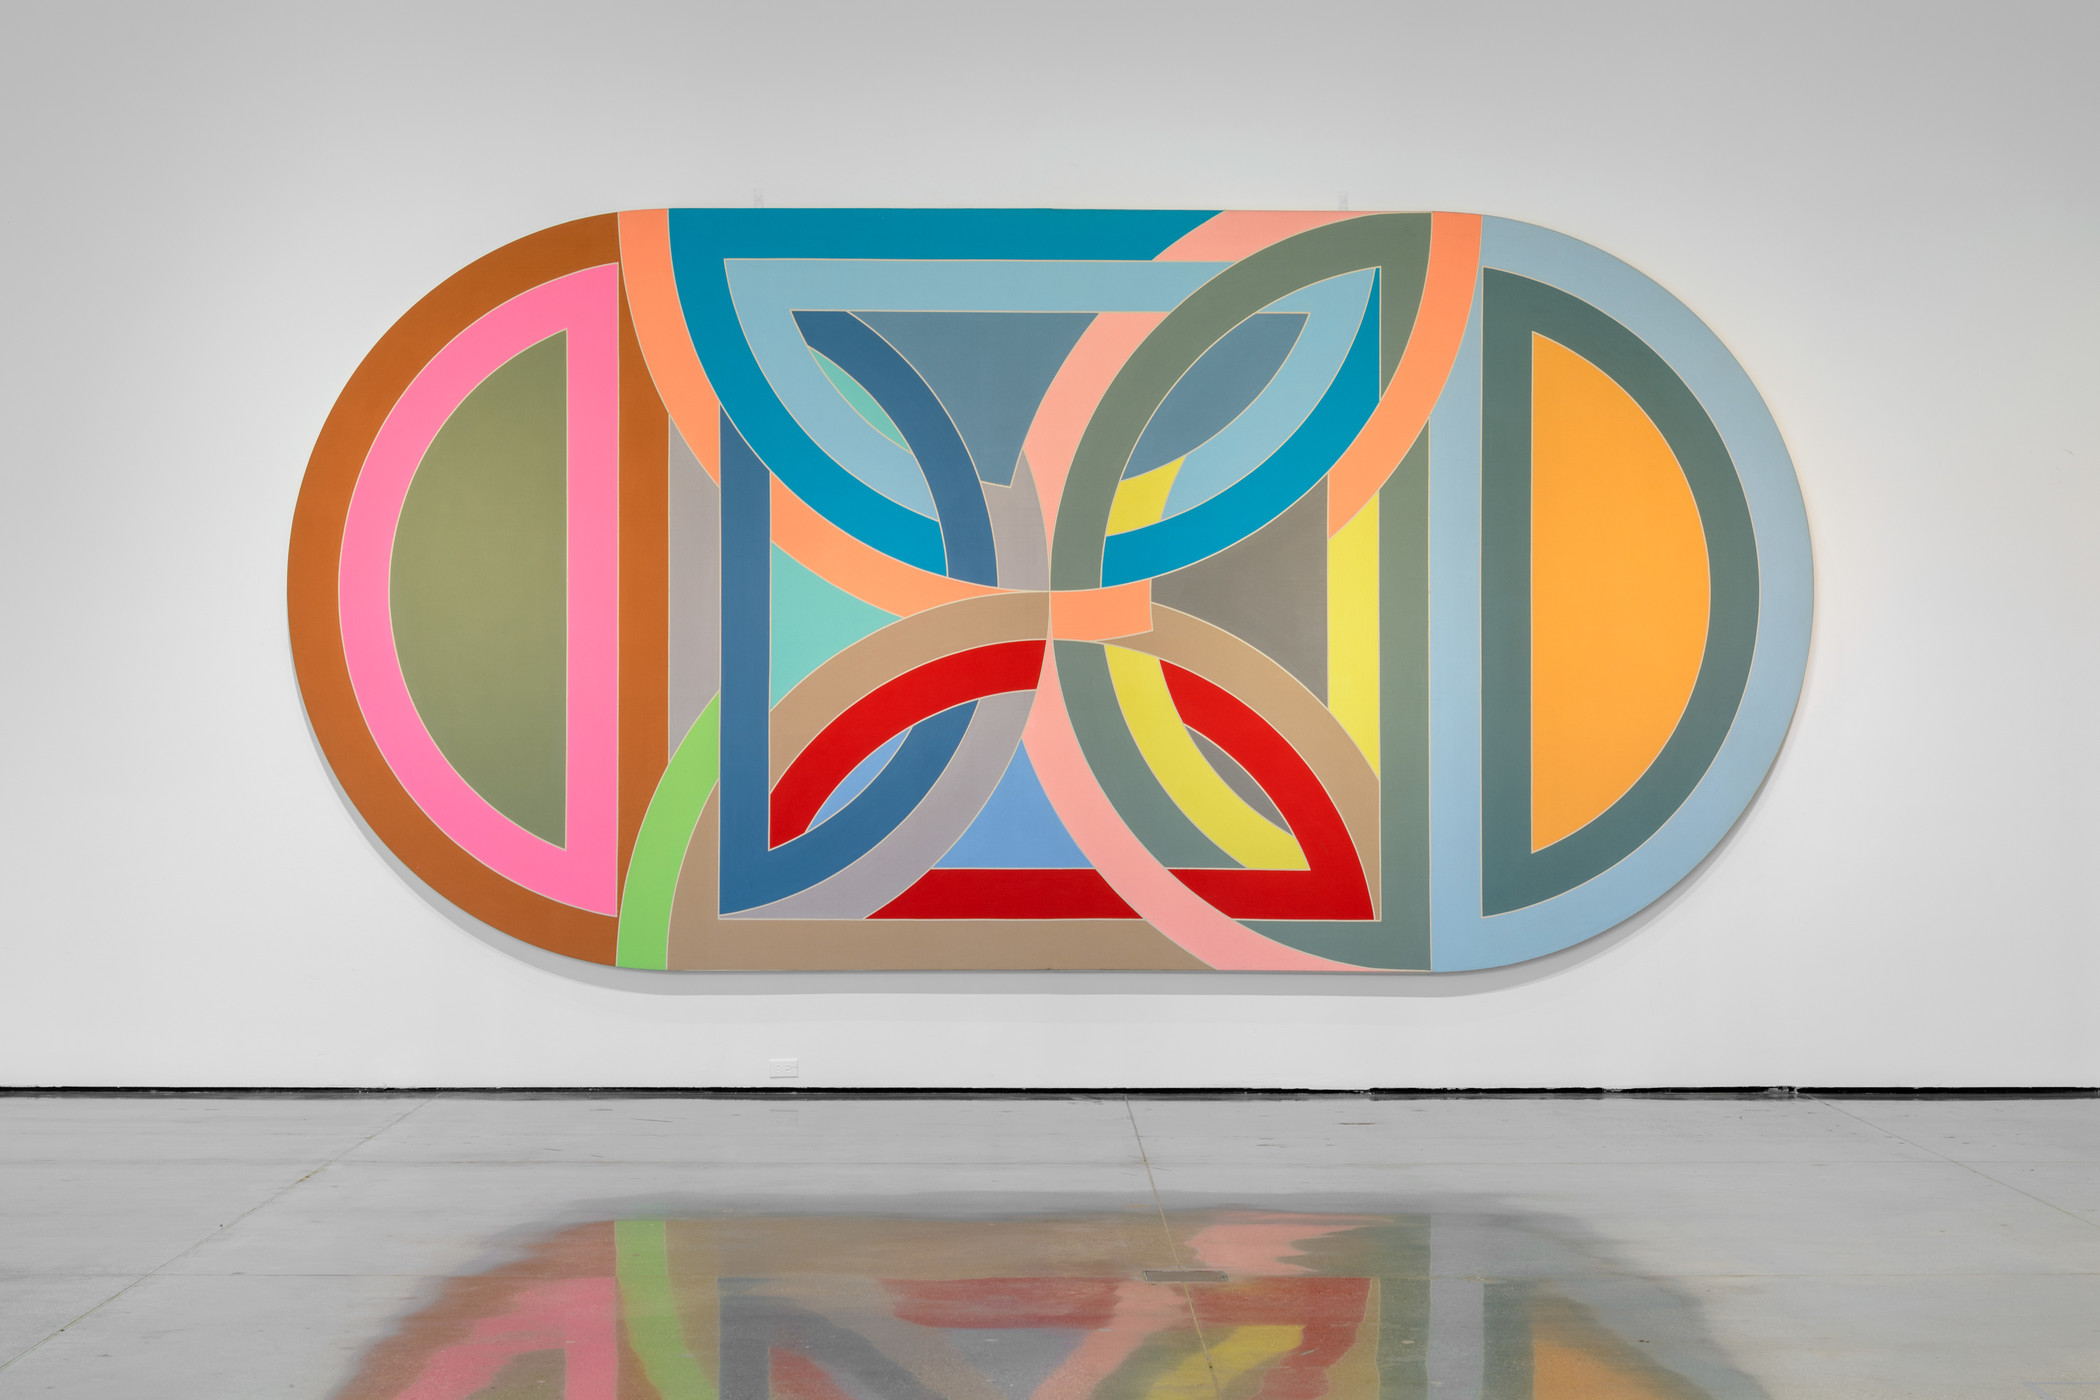 Frank Stella, Hiragla Variation I, 1969, Museum Purchase with Museum Associates Acquisitions Fund, installation view, Frank Stella: Selections from the Permanent Collection, Los Angeles County Museum of Art, May 5–September 15, 2019, art © 2019 Frank Stella/Artists Rights Society (ARS) New York, photo © Museum Associates/LACMA